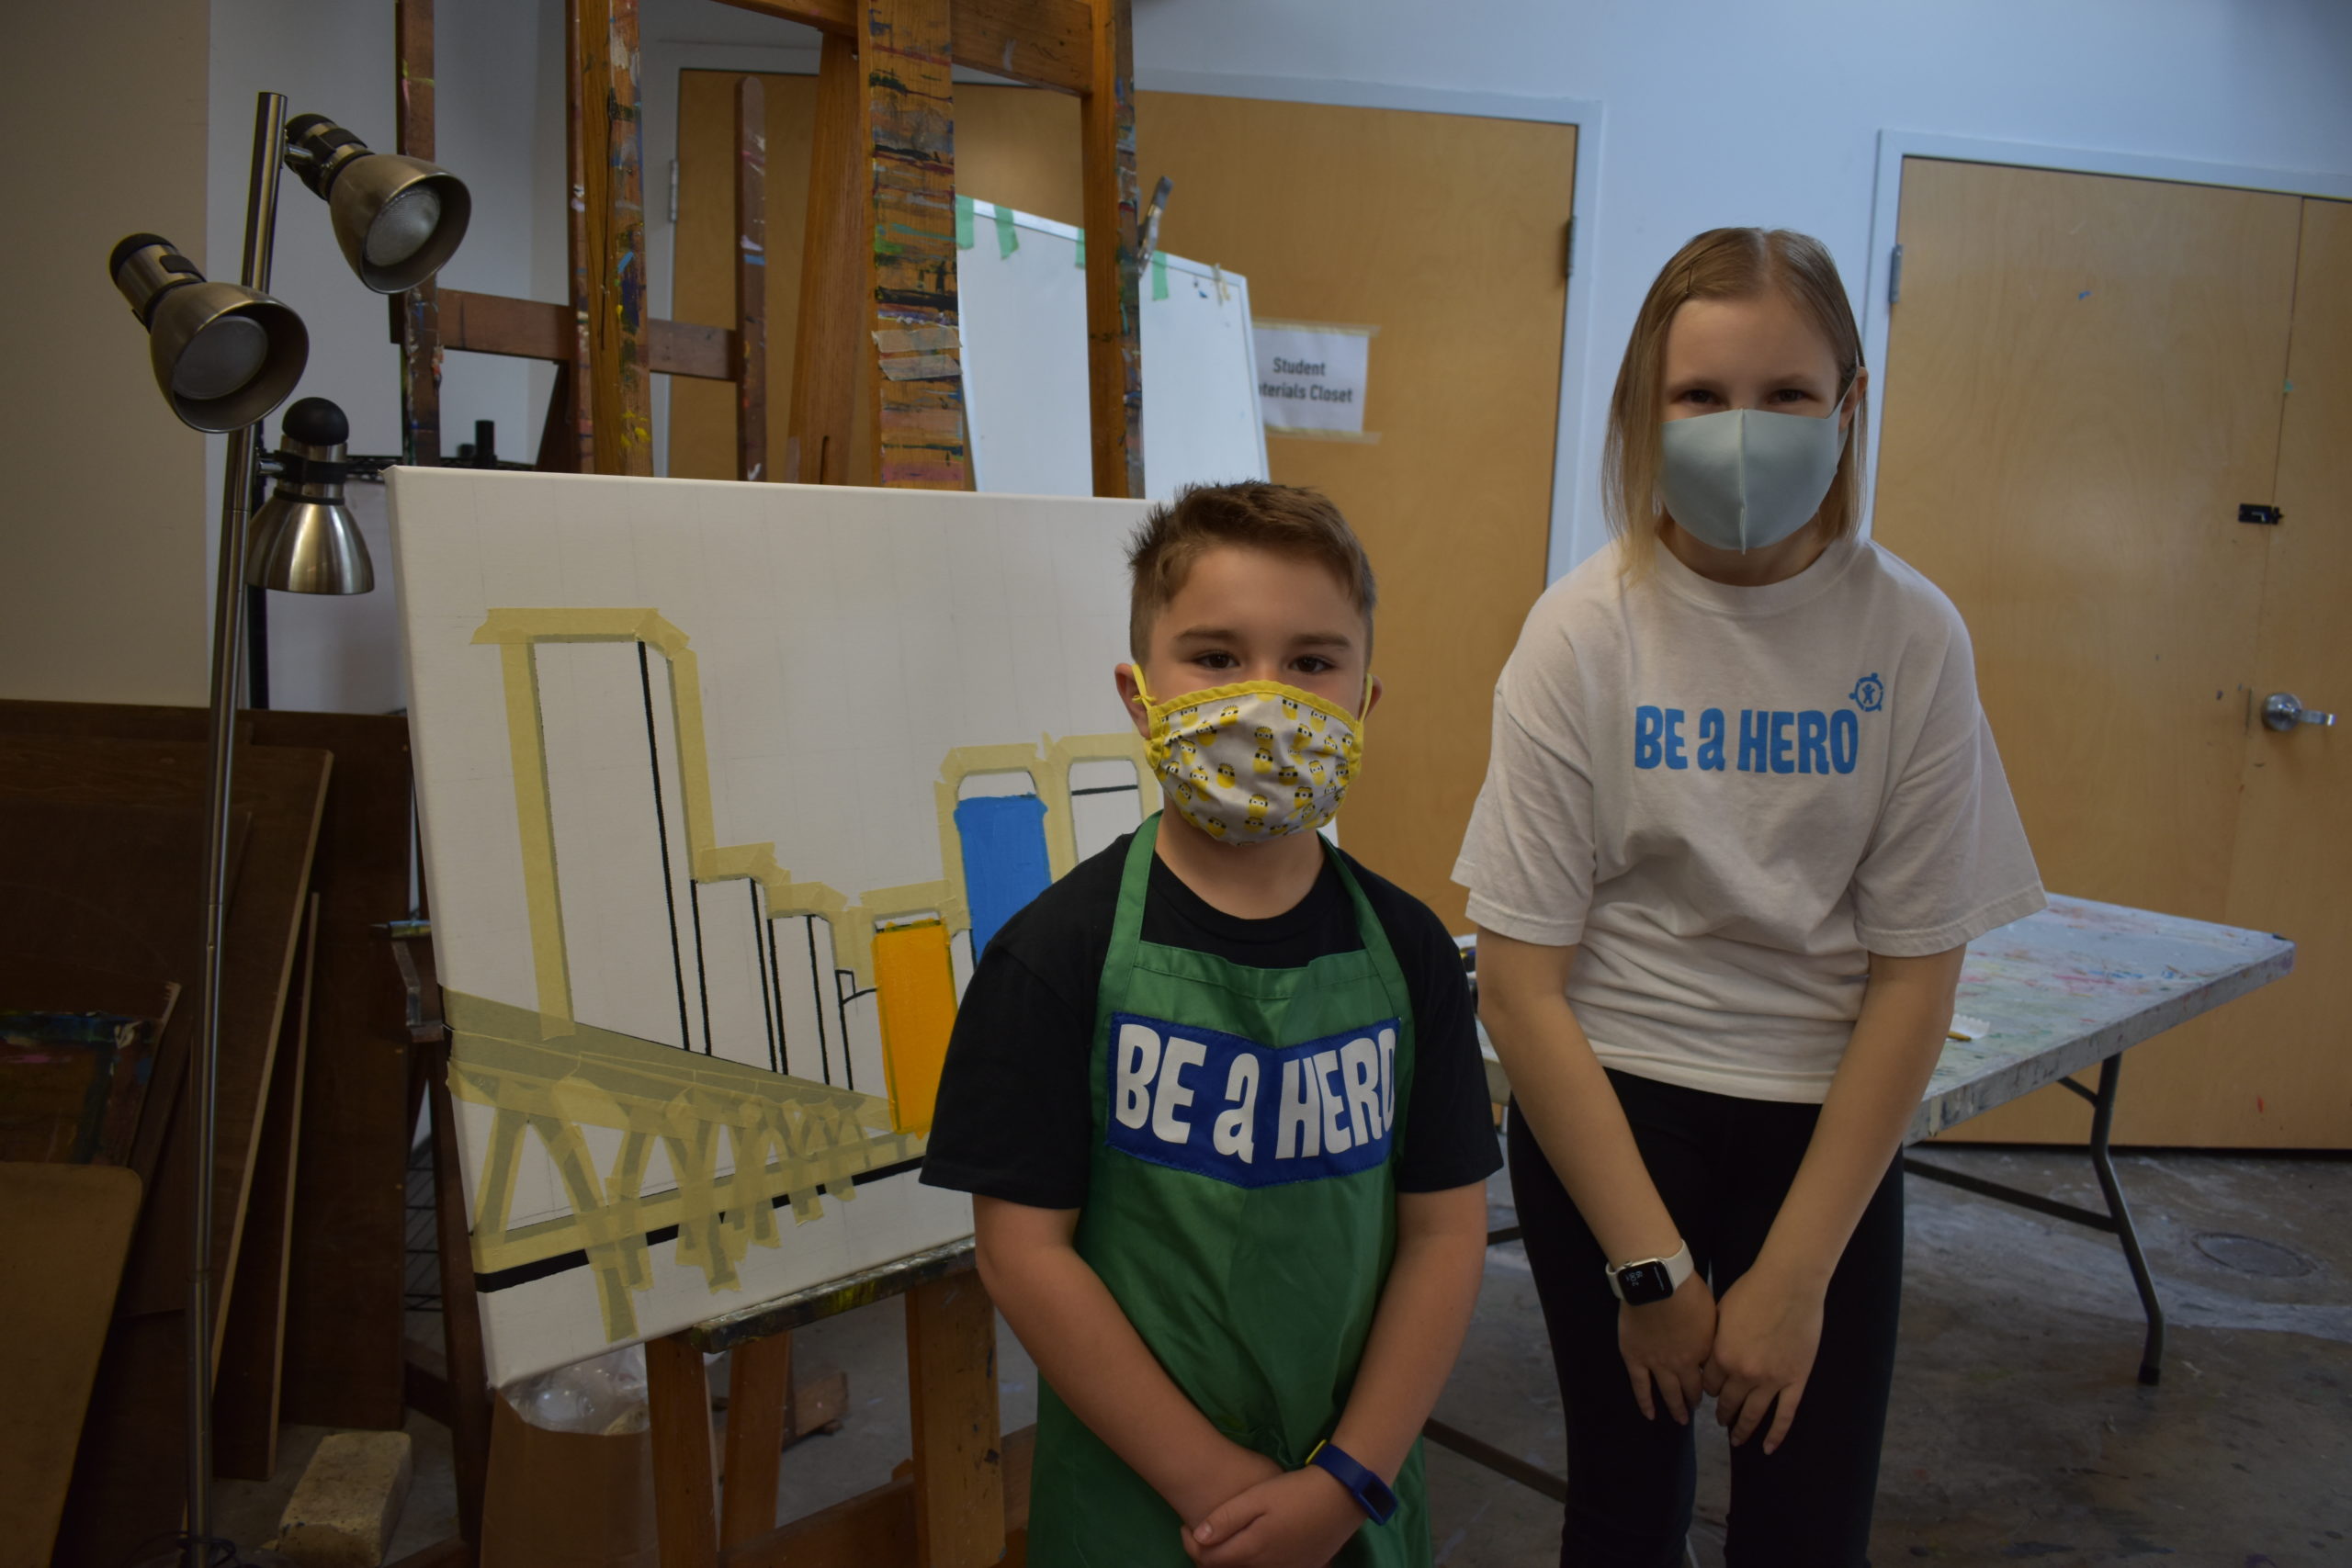 Image two children in an art studio wearing shirts that say Be A Hero